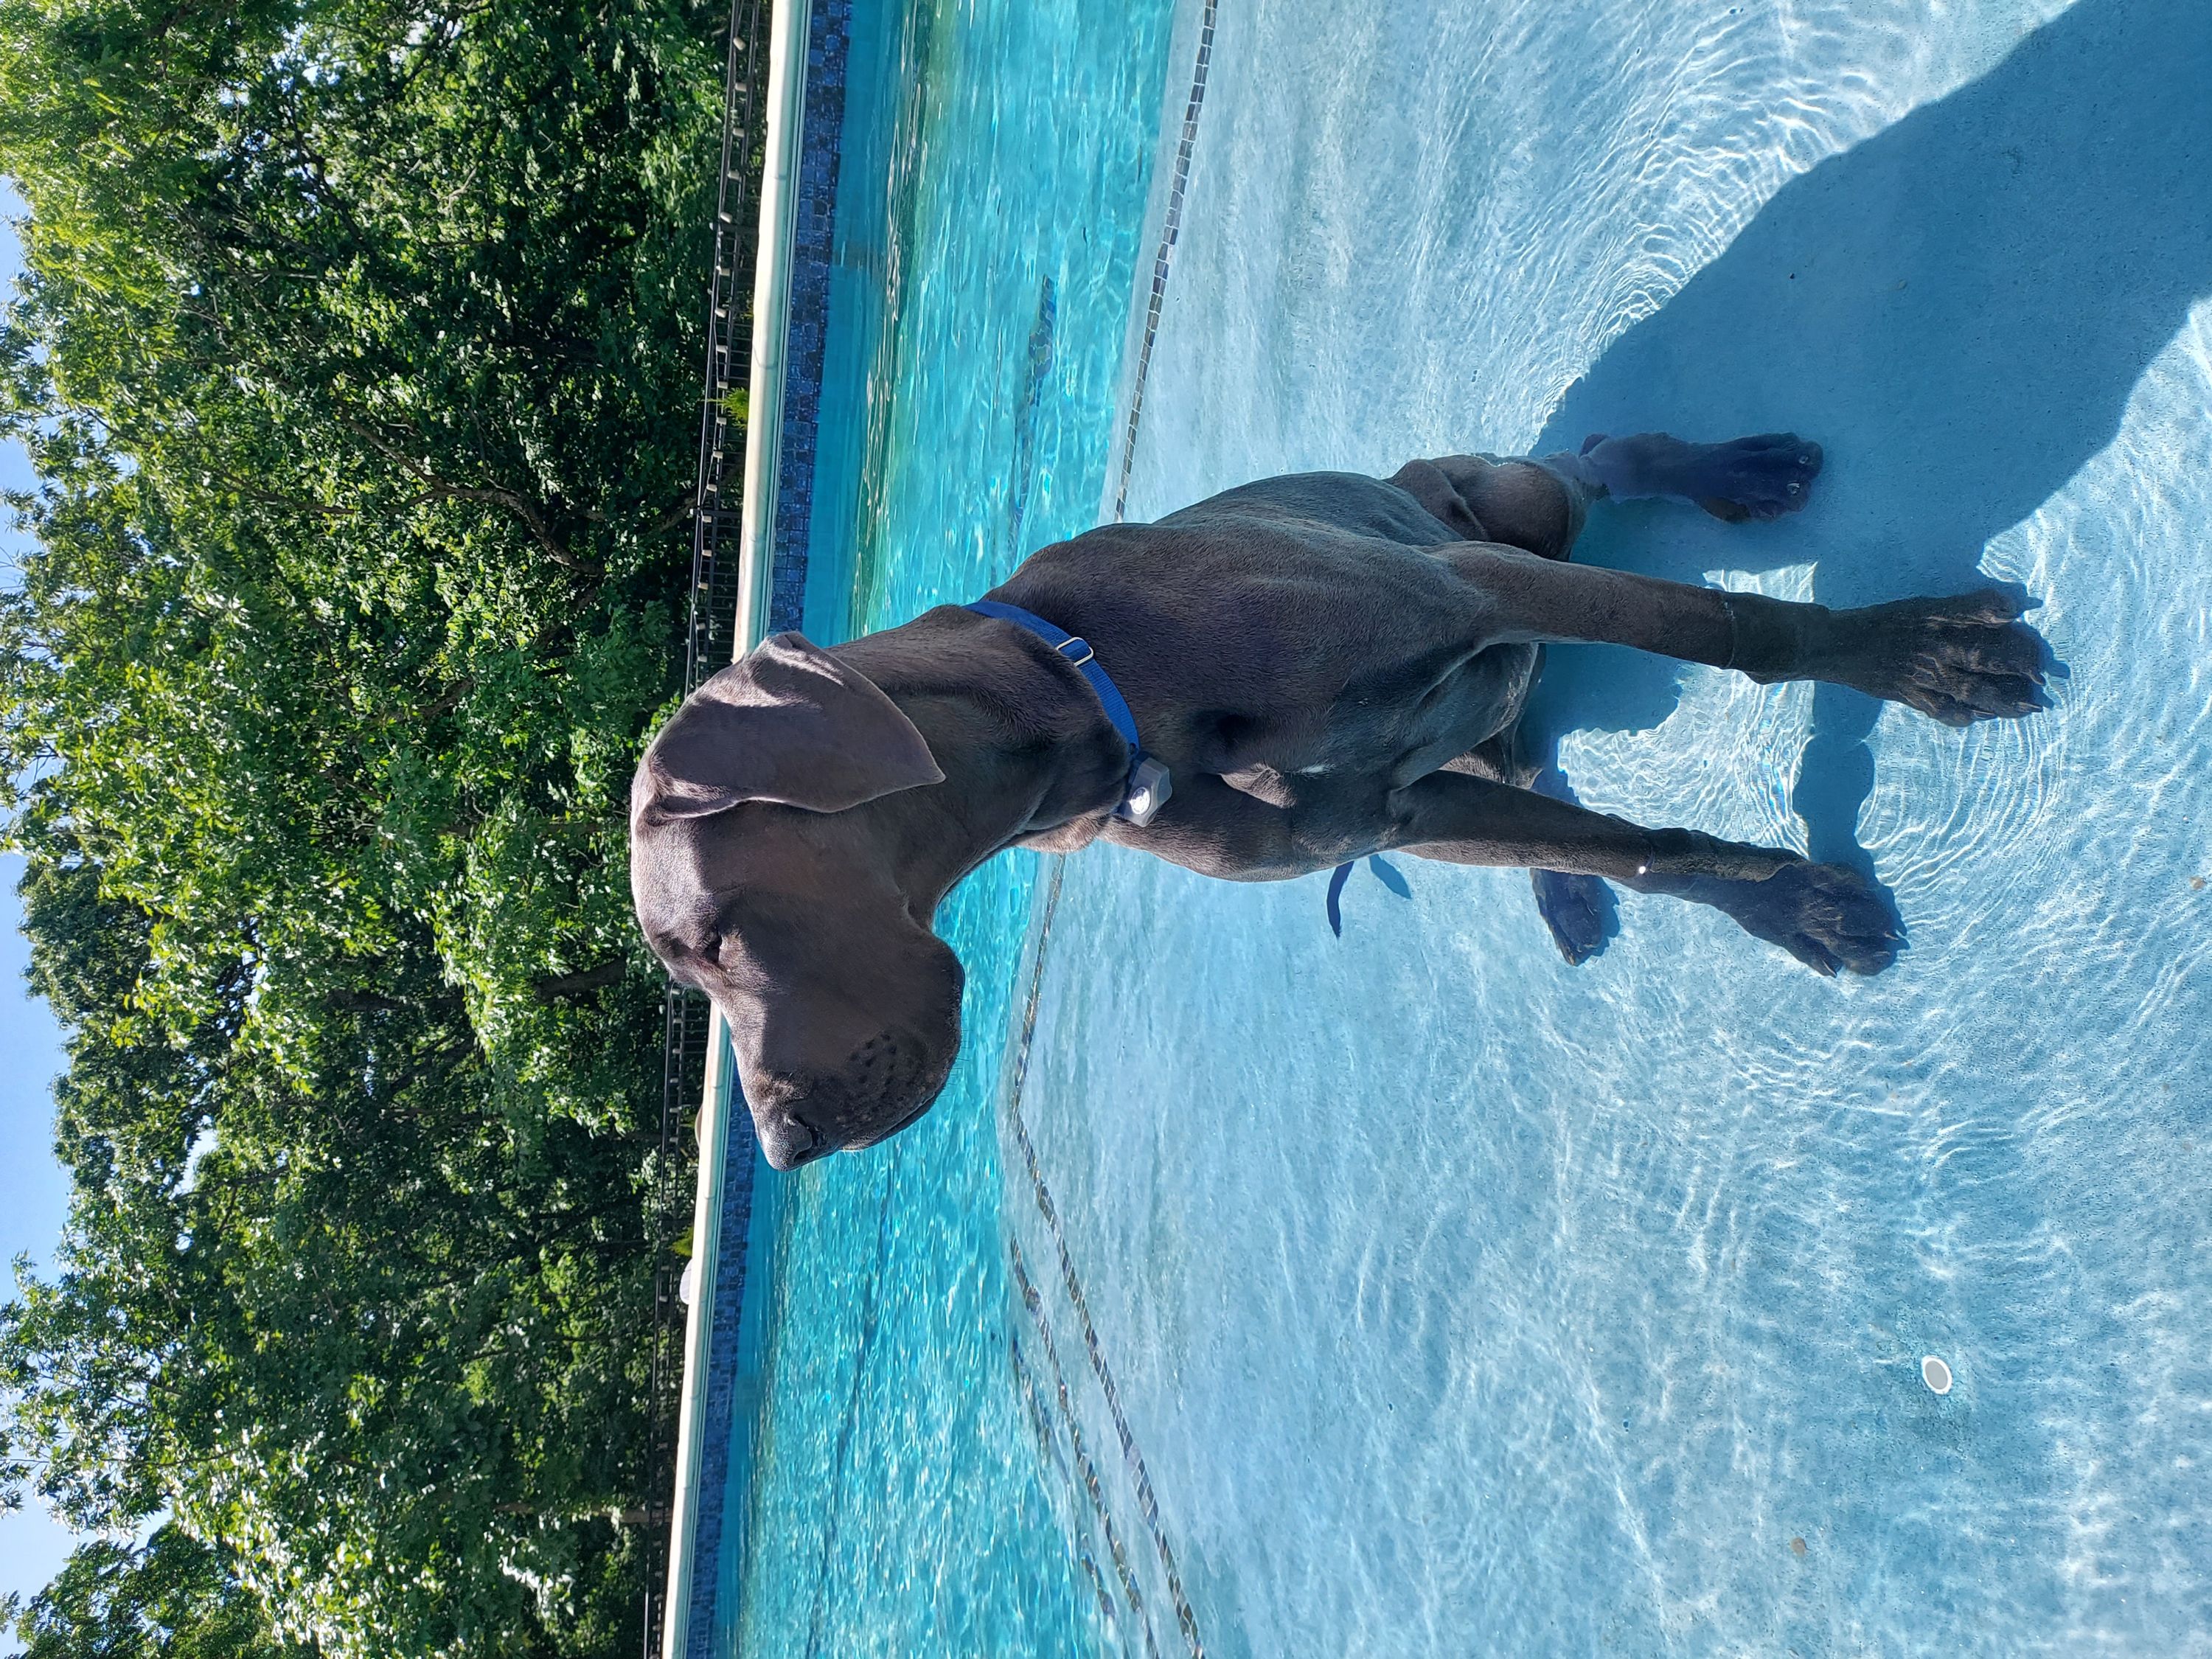 Dr. Kurucz's 8-month-old great dane enjoying the water in the pool